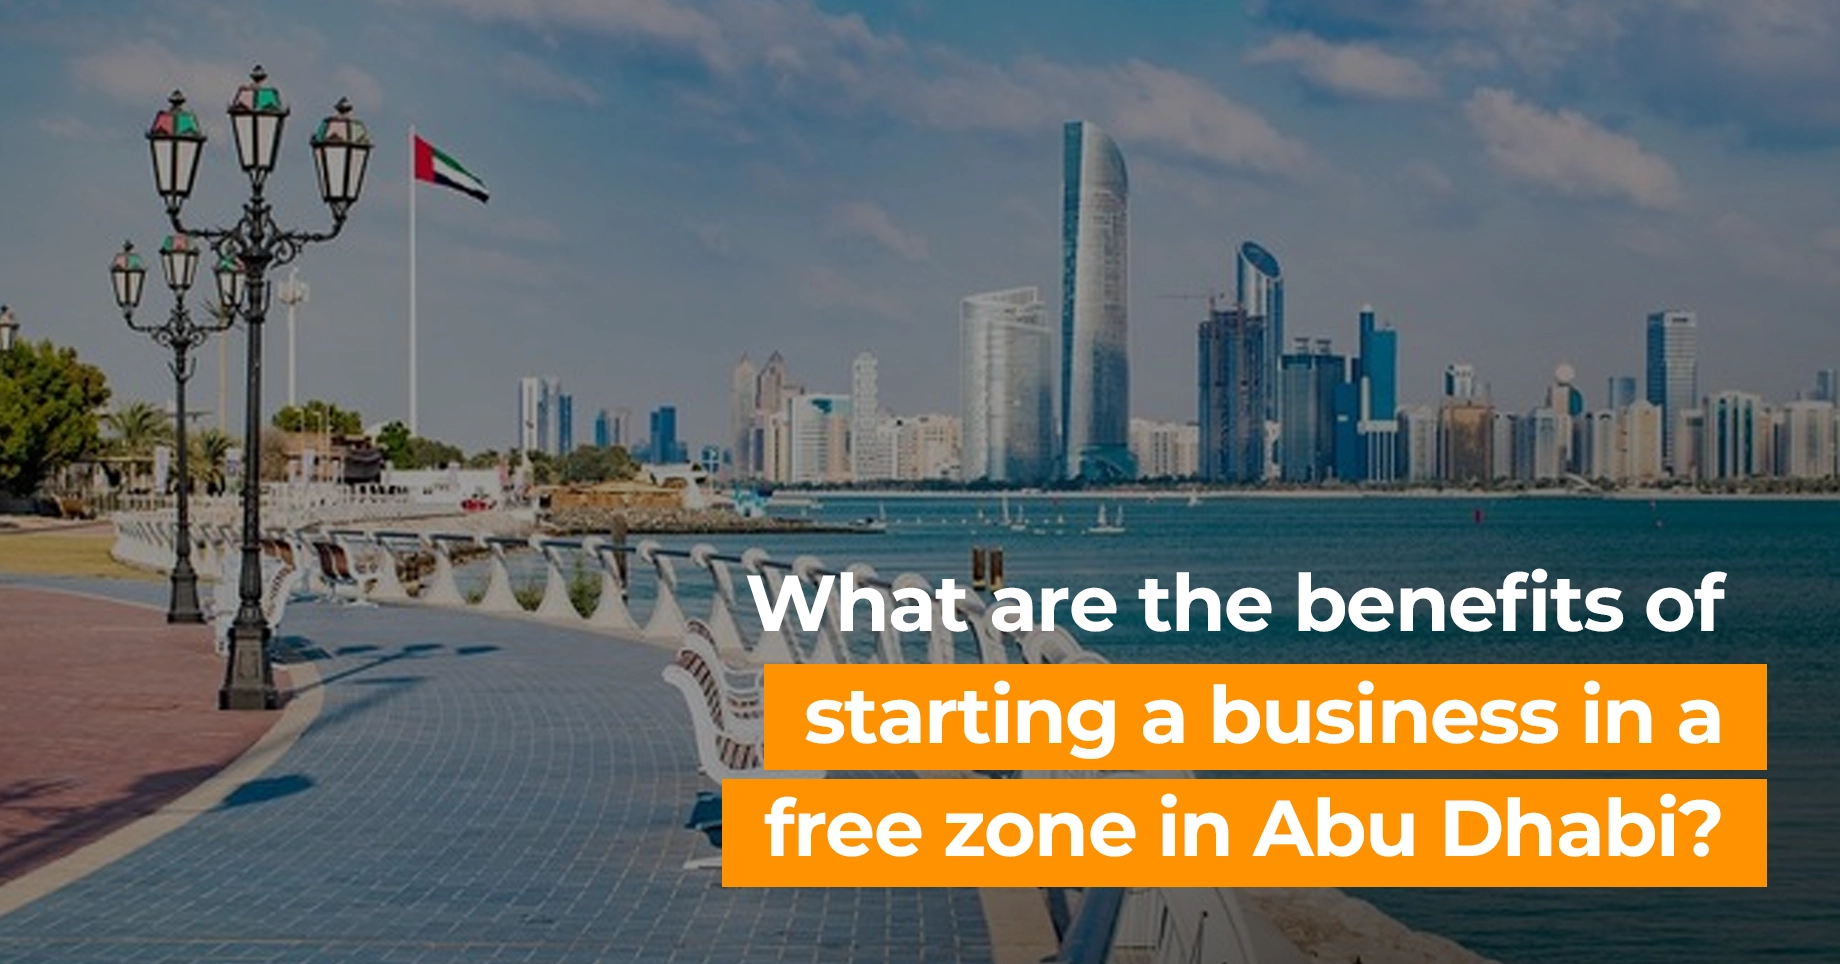 What are the benefits of starting a business in a free zone in Abu Dhabi?